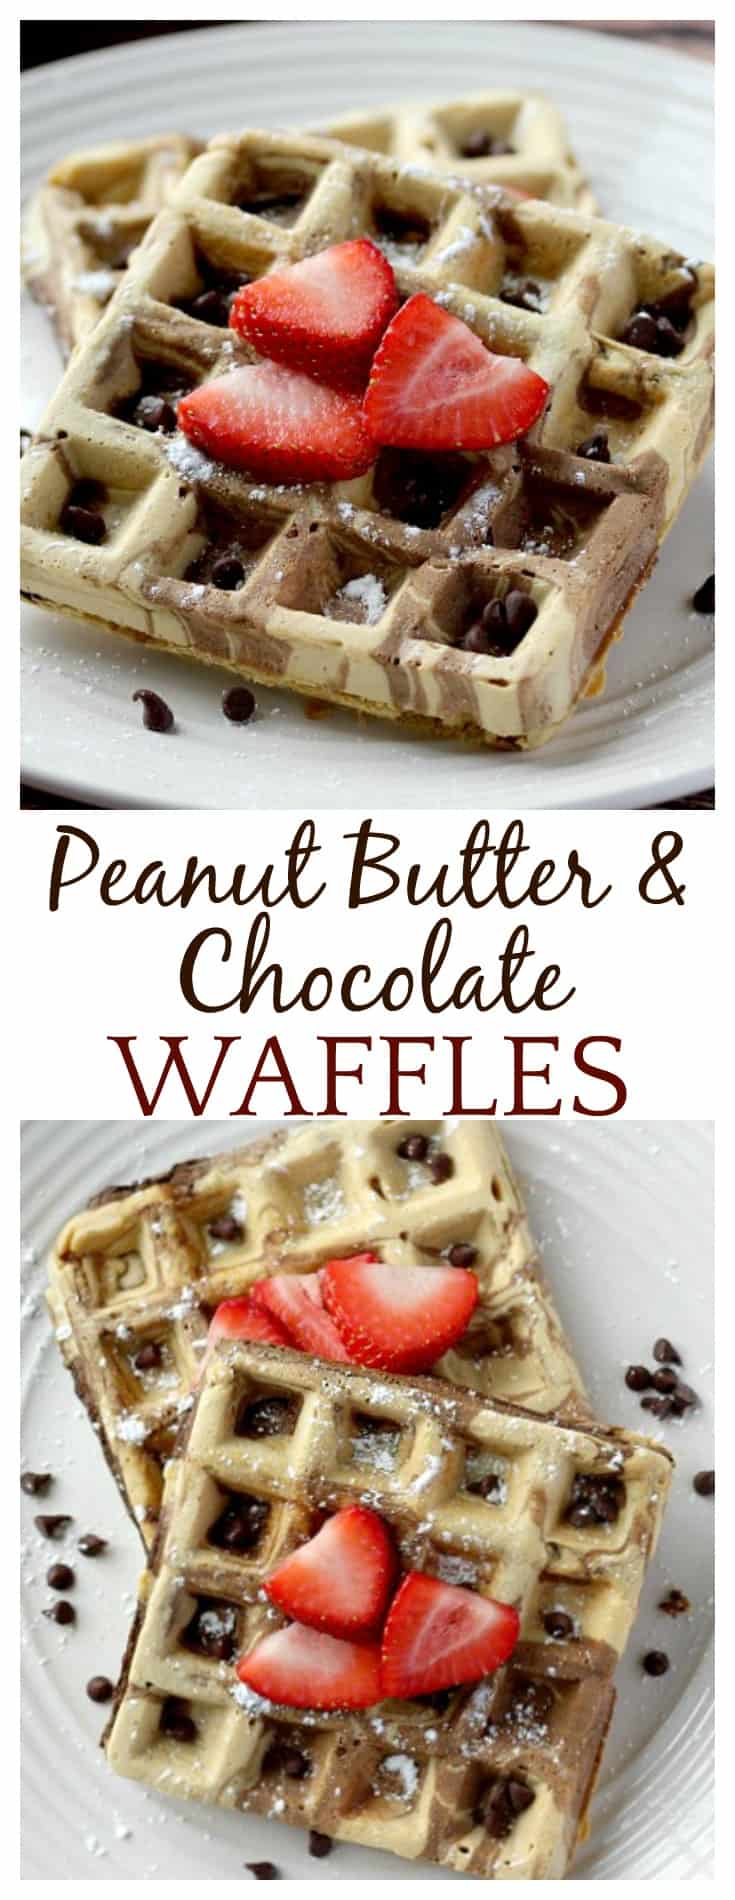 These Peanut Butter and Chocolate Swirled Waffles are the perfect breakfast recipe for all the peanut butter and chocolate lovers out there! Serve with powdered sugar and strawberries or jam for breakfast, or add chocolate sauce for brunch! Try making a waffle ice cream sundae for dessert! The possibilities are endless!